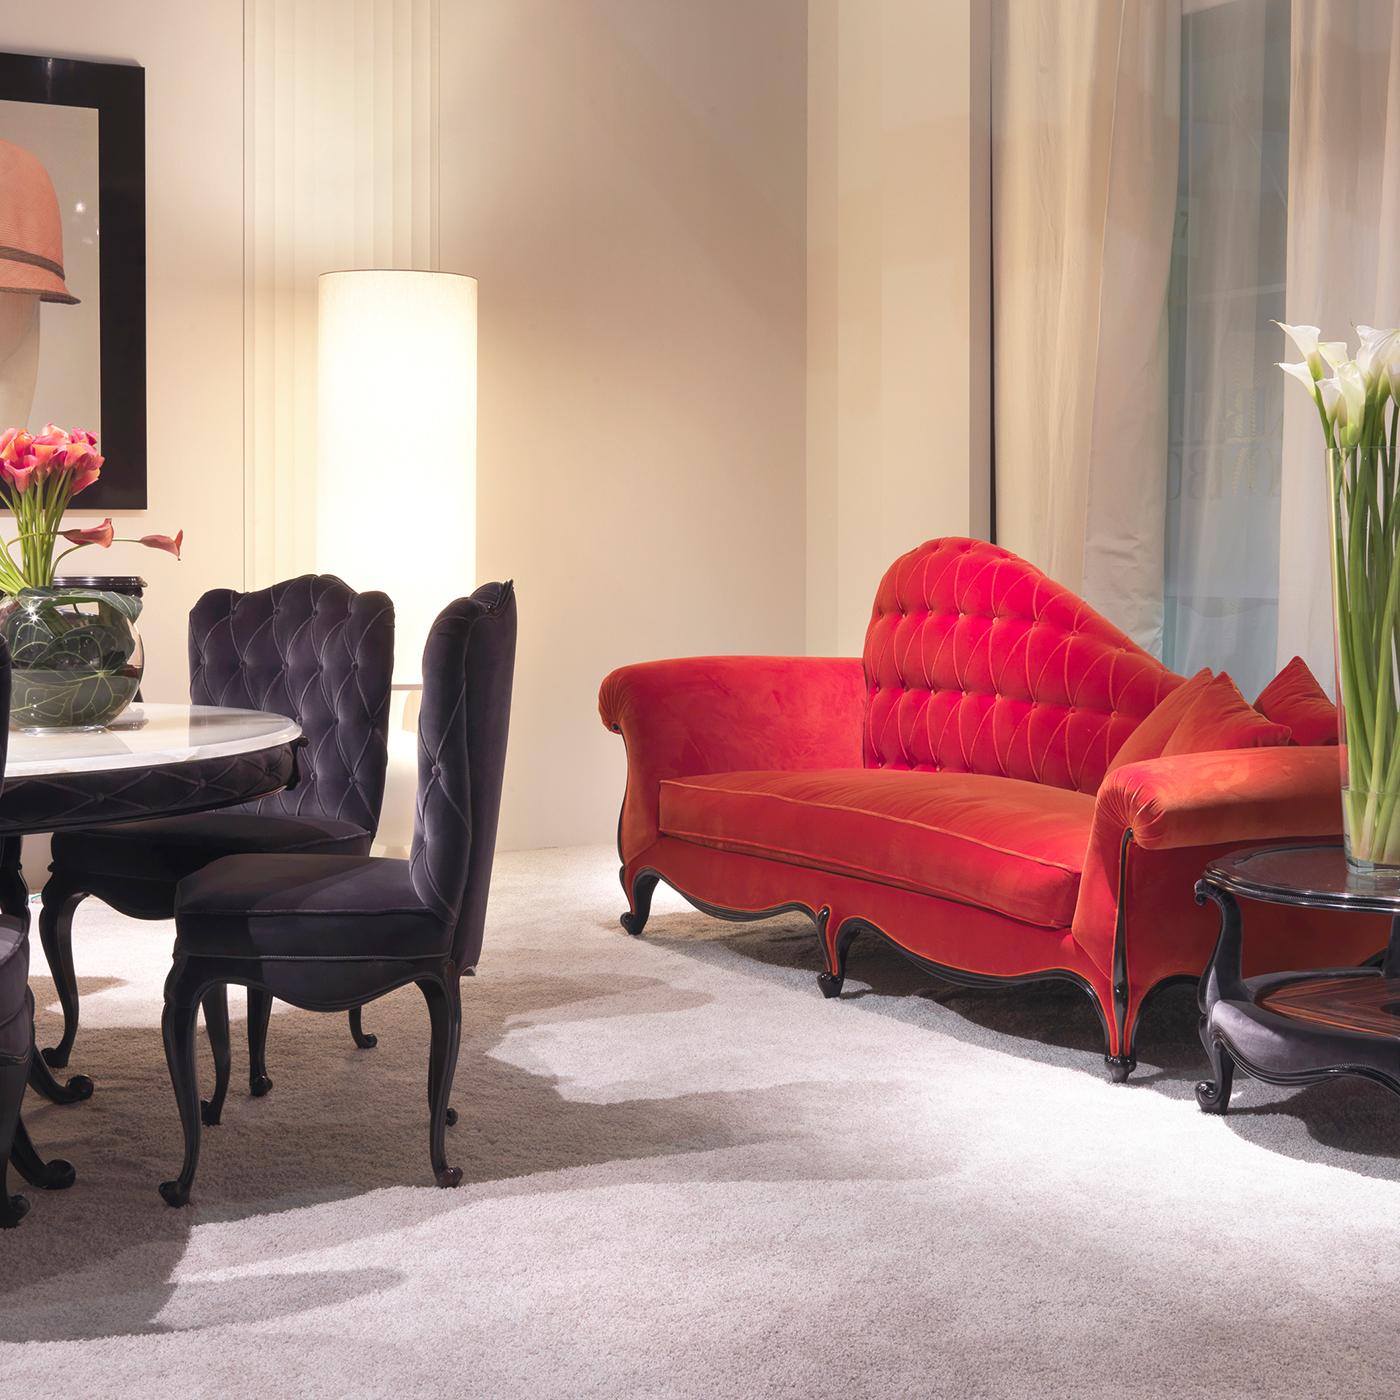 Vintage-inspired with dainty decorative details defines the captivating personality of this stylish dormeuse flaunting a velvet upholstery in flaming red. Its harmonious, romantic profile is the result the generous padding of the cherry wood frame,